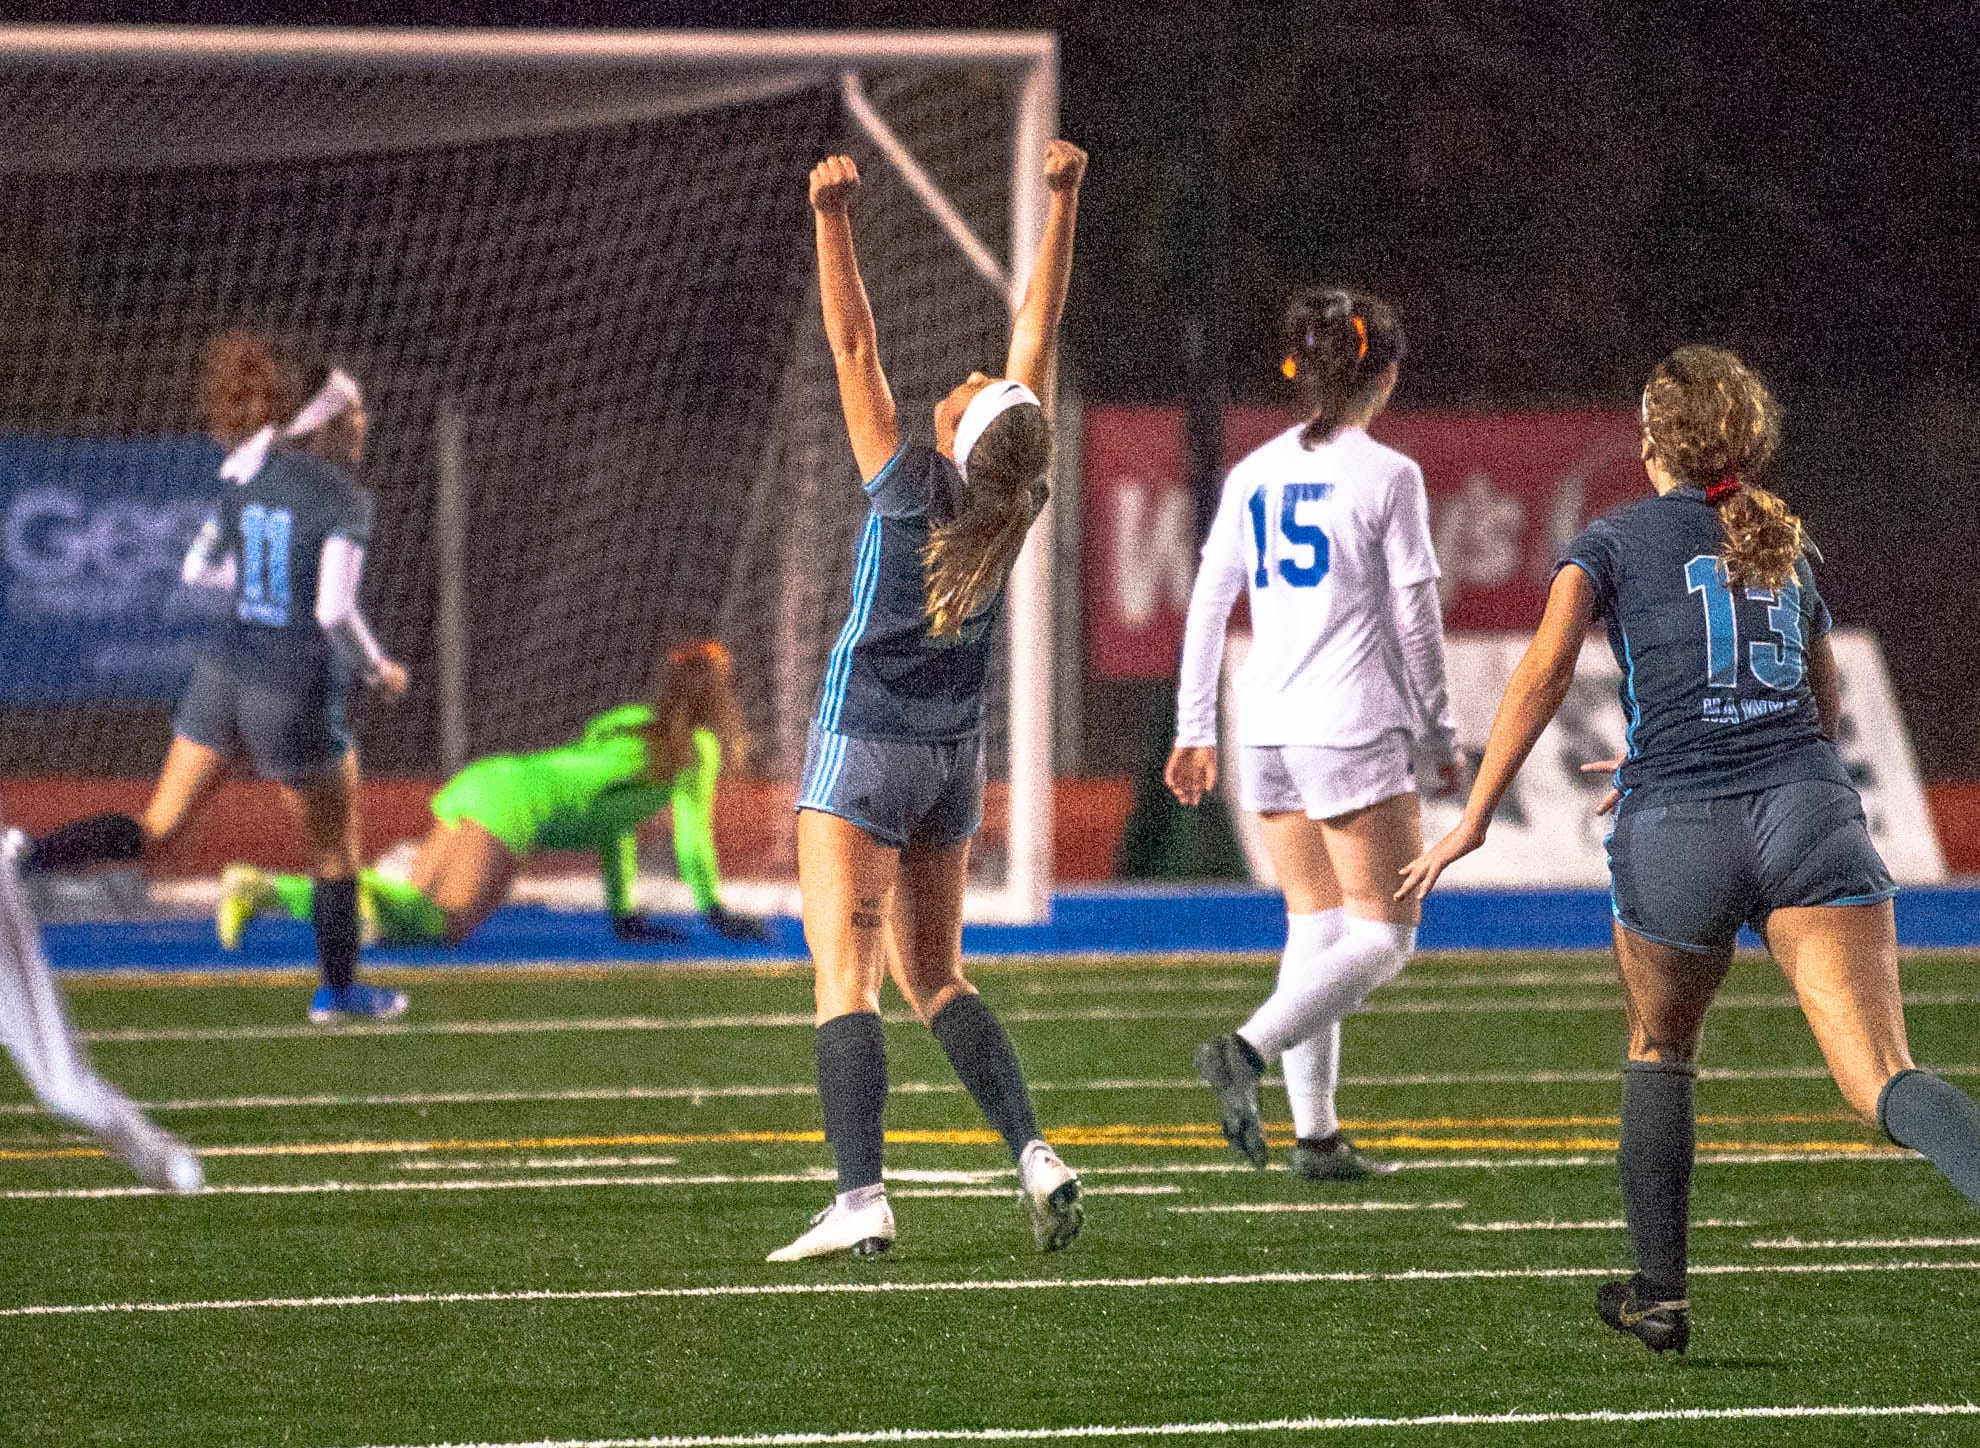 Hockinson's Megan Meindersee lifts her arms in celebration after scoring the Hawks' second goal in a 2-0 victory over Ridgefield in the 2A State semifinals Friday at Shoreline Stadium.